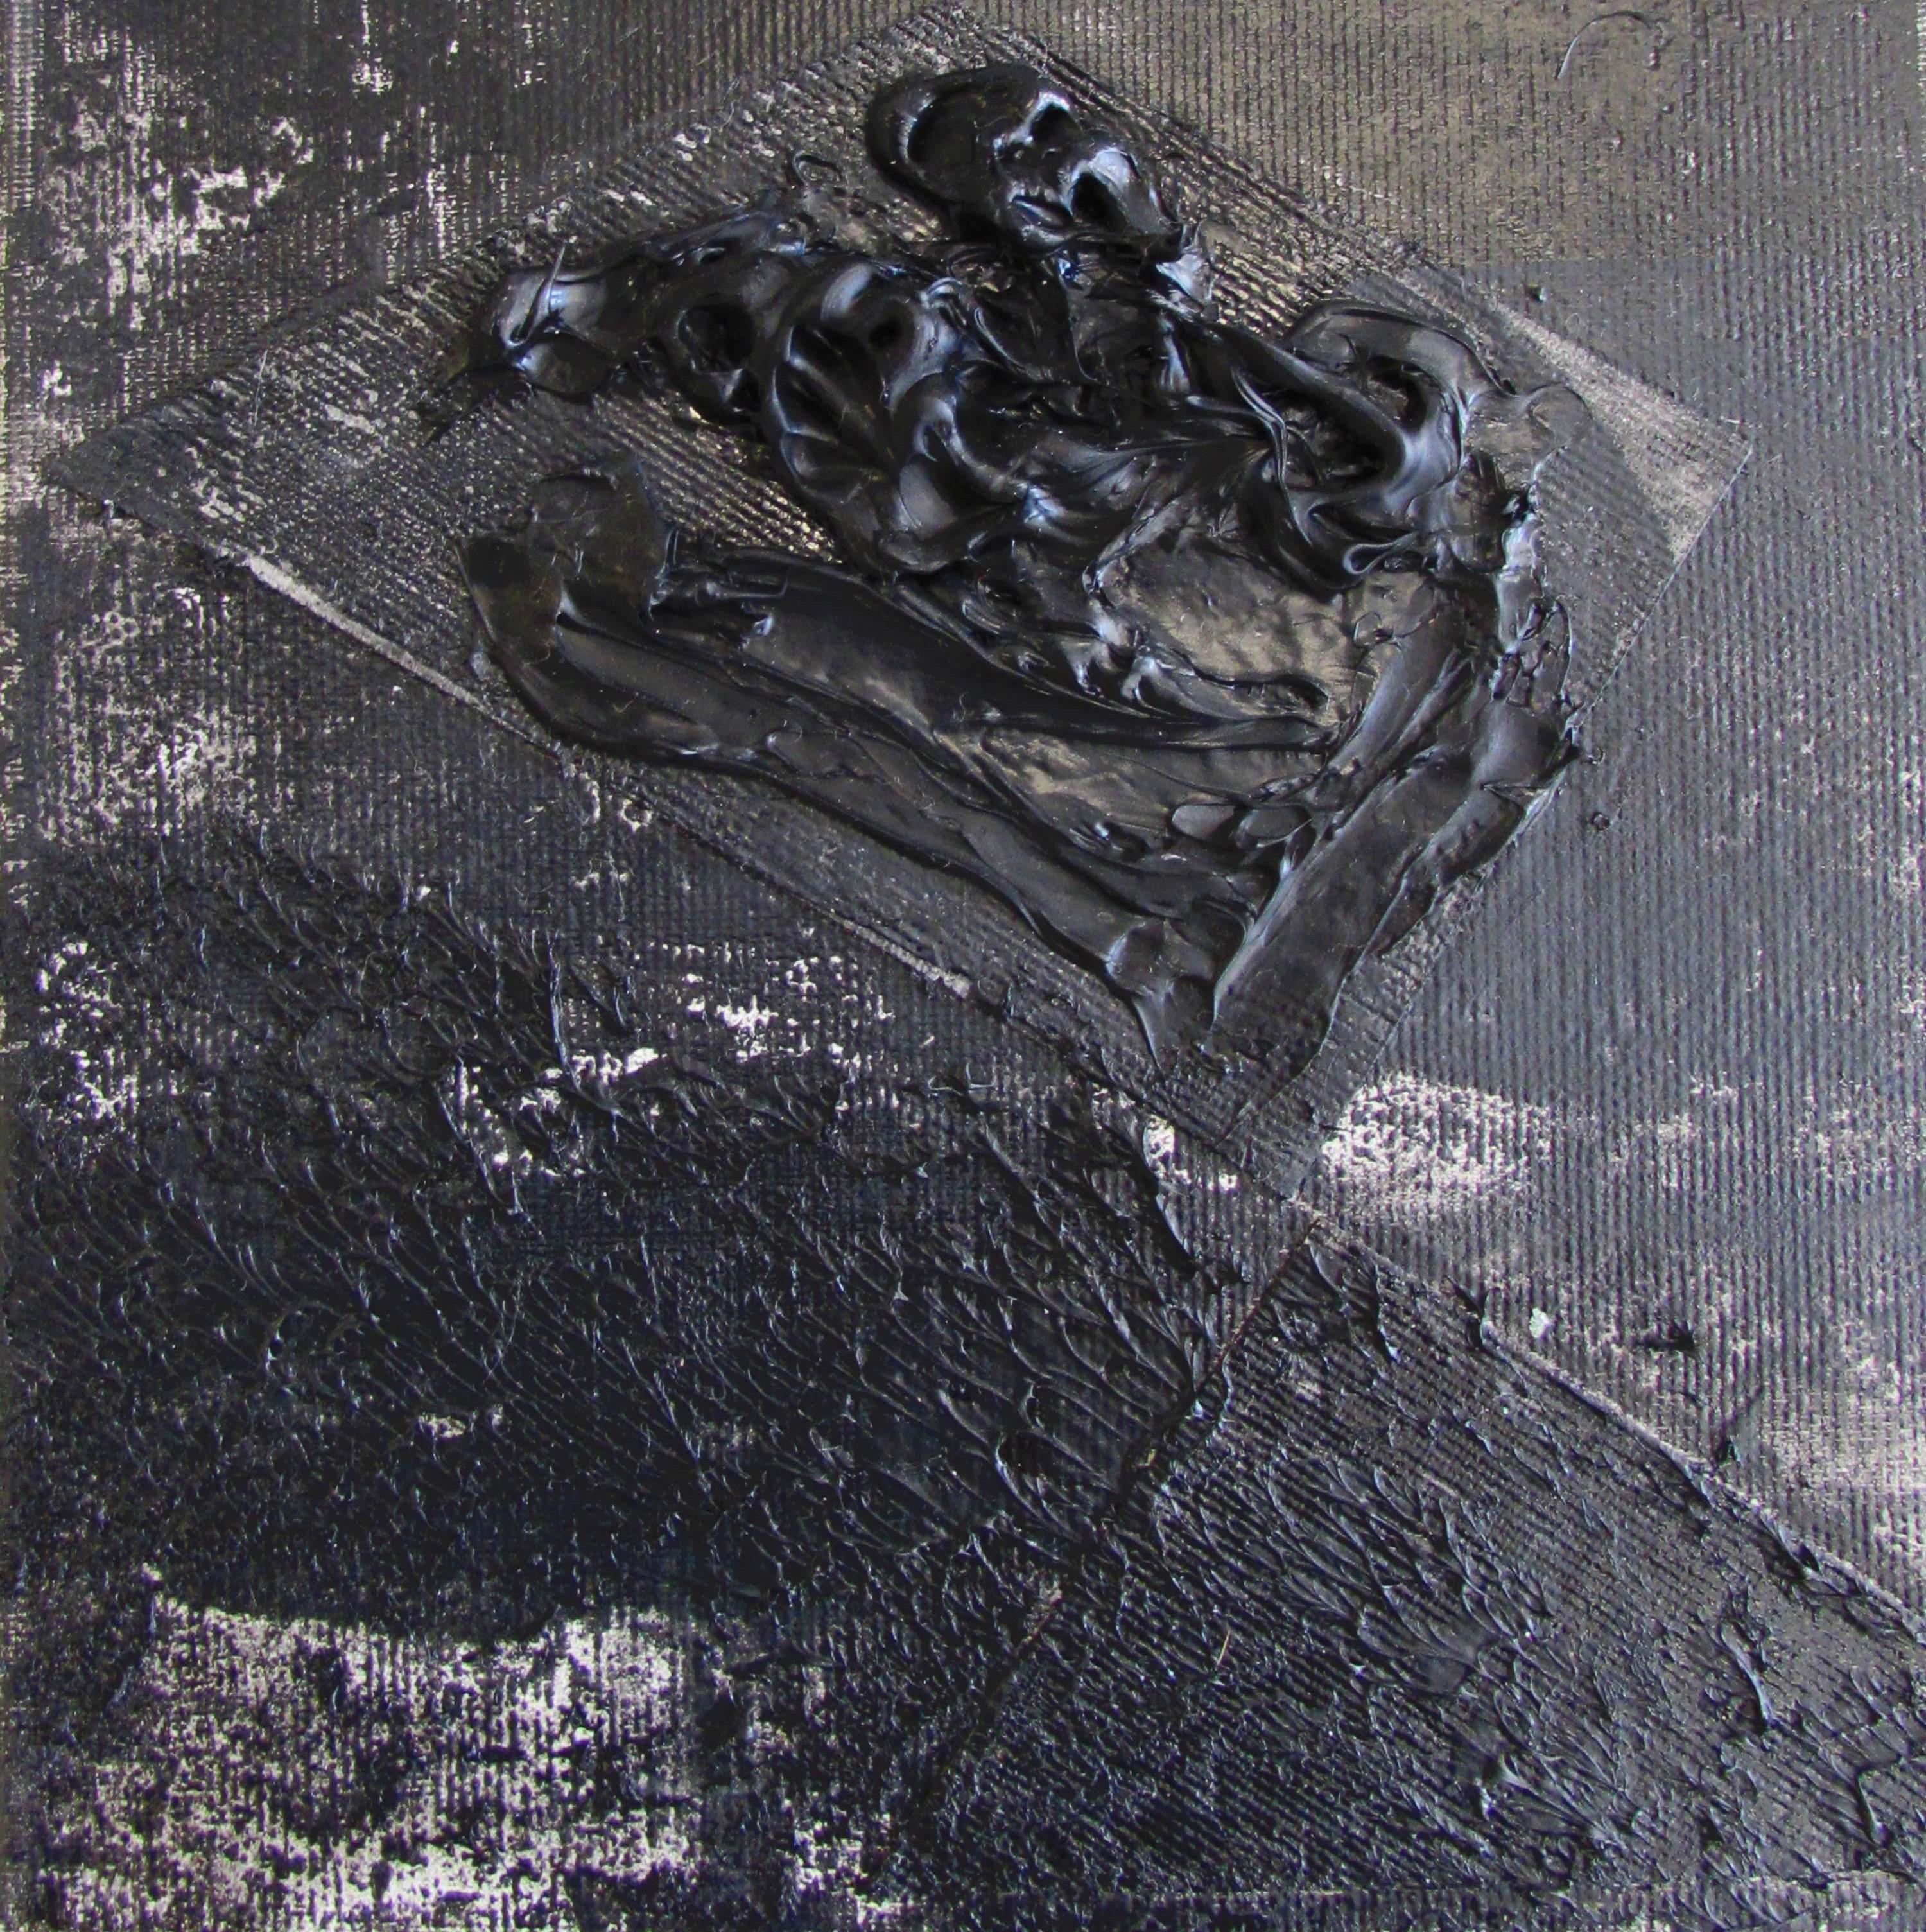 Untitled 02 [Dissecting the Unknown 02] - Contemporary, Black, Monochrome - Abstract Painting by Zsolt Berszán